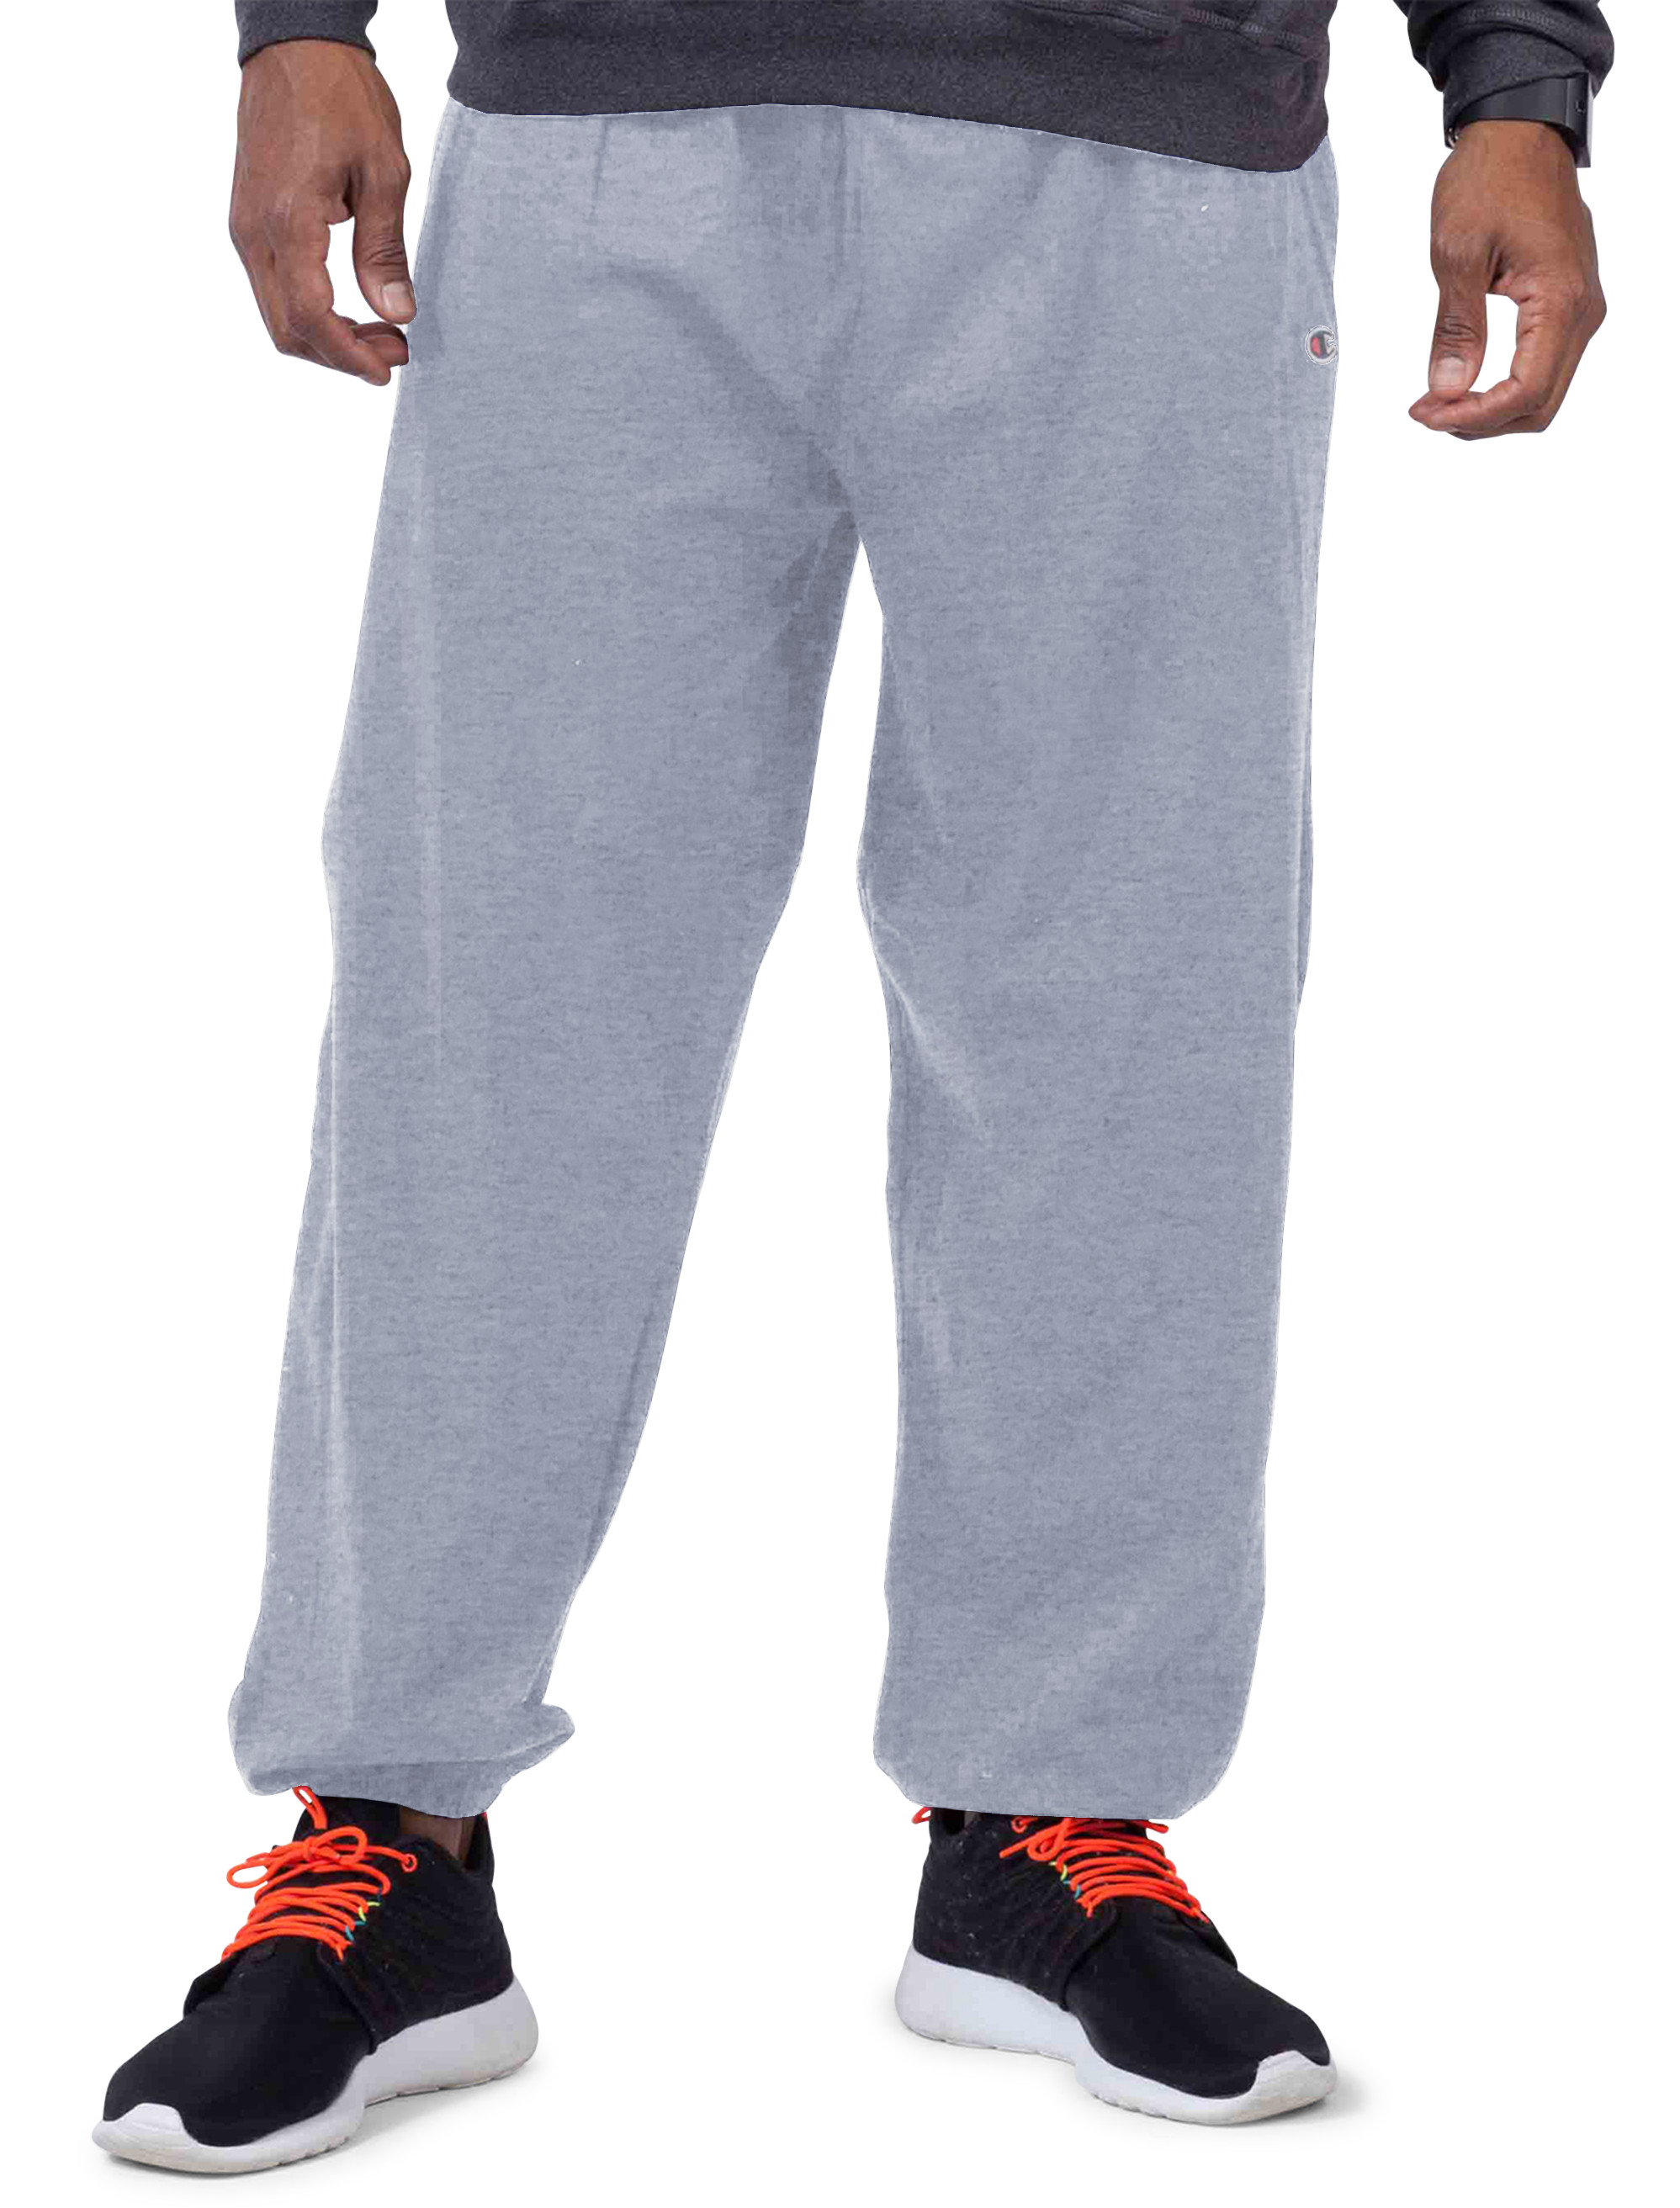 Champion Sweatpants for Men Big and Tall – Embroidered Men's Fleece Joggers